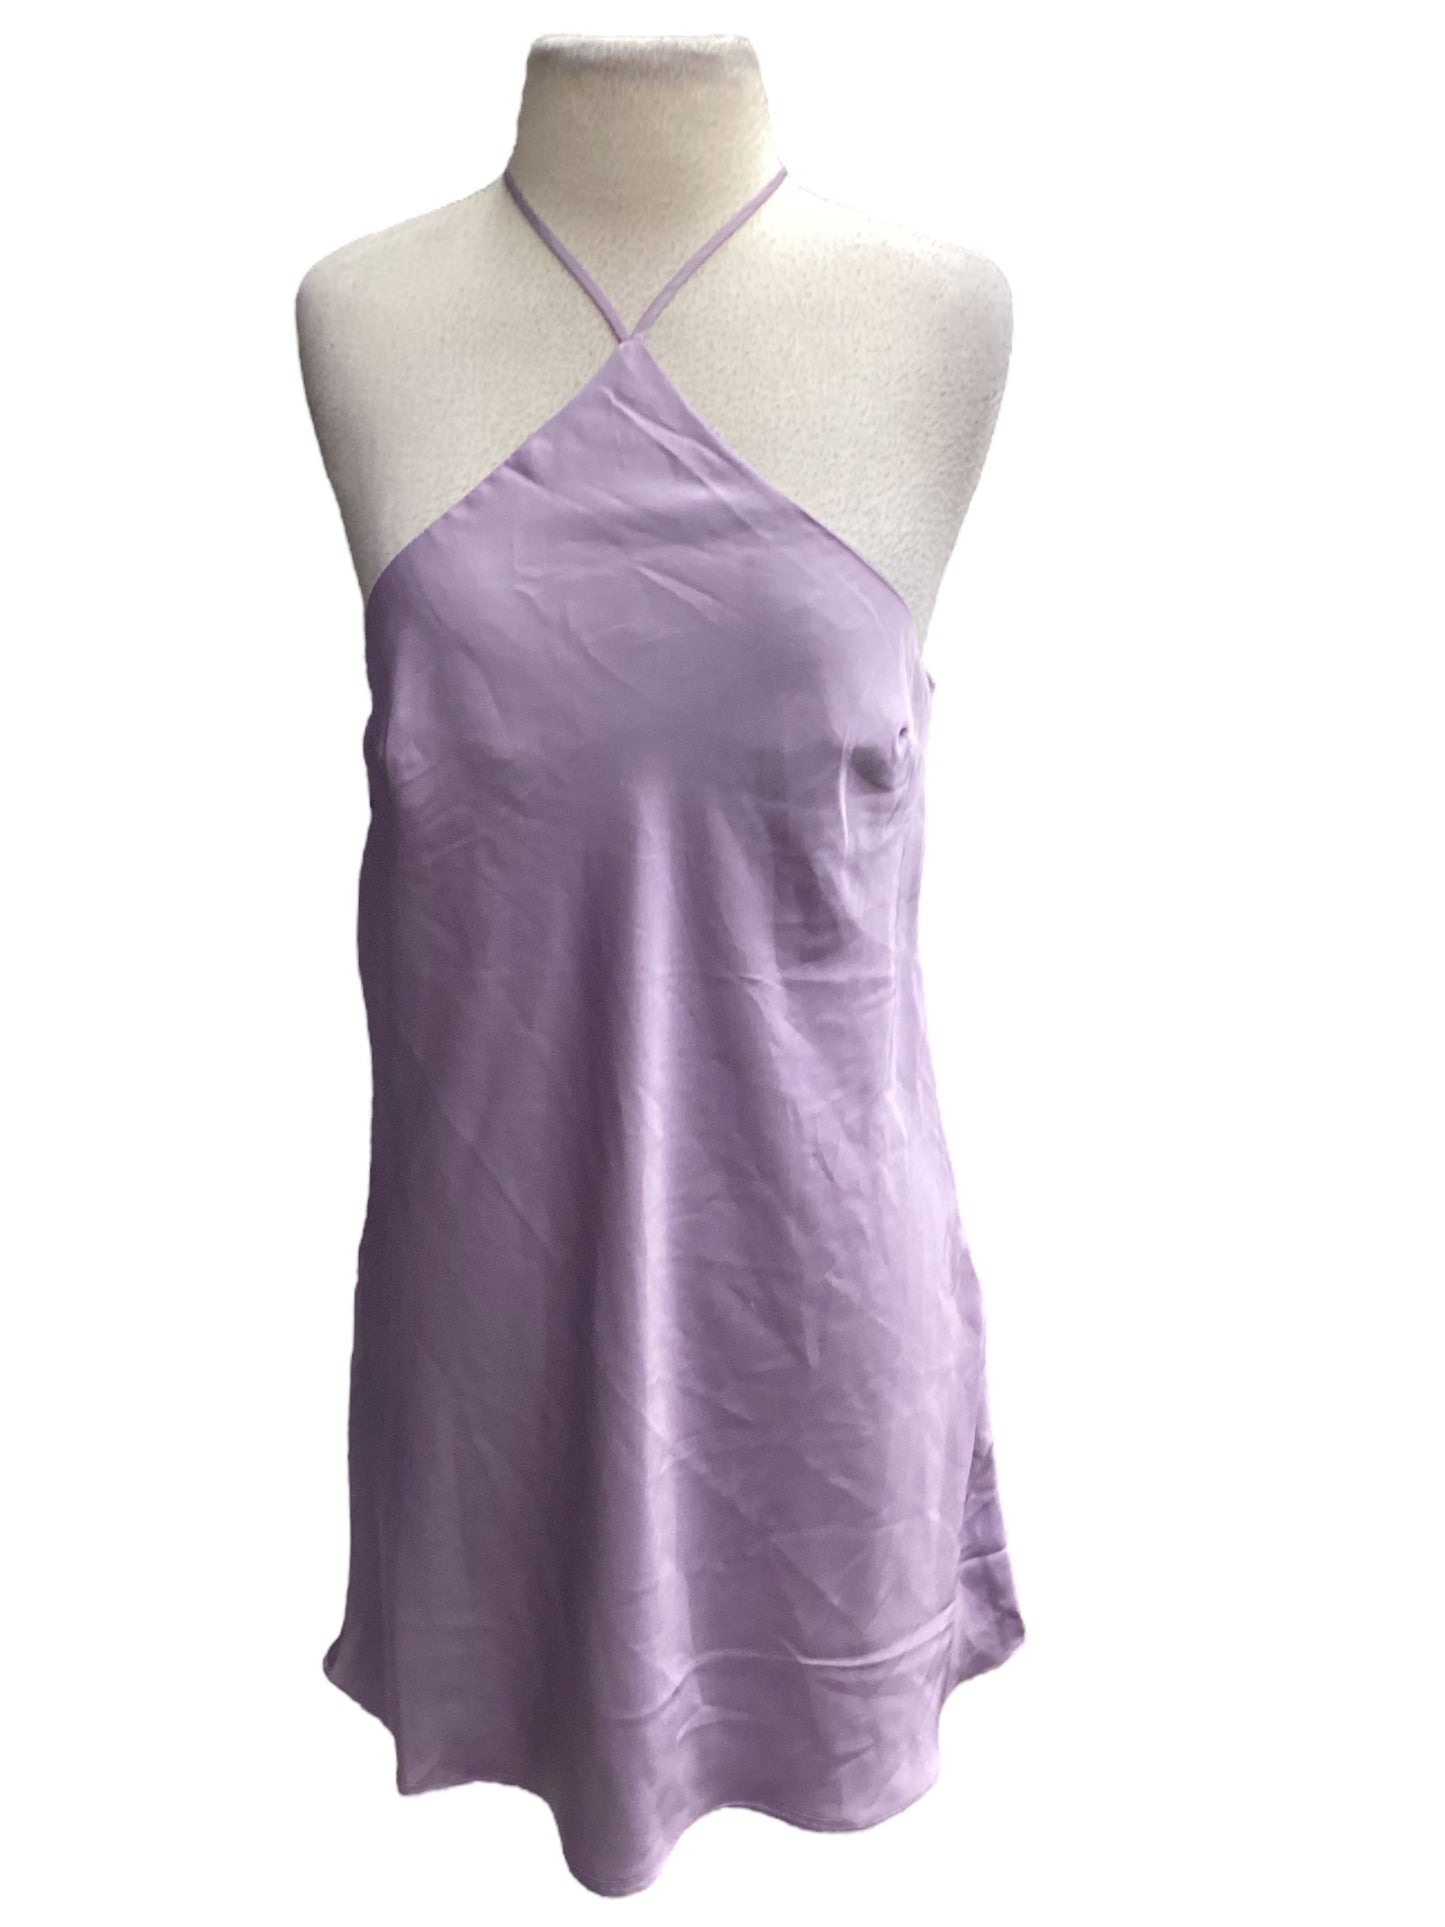 Purple Dress Casual Short Forever 21, Size M